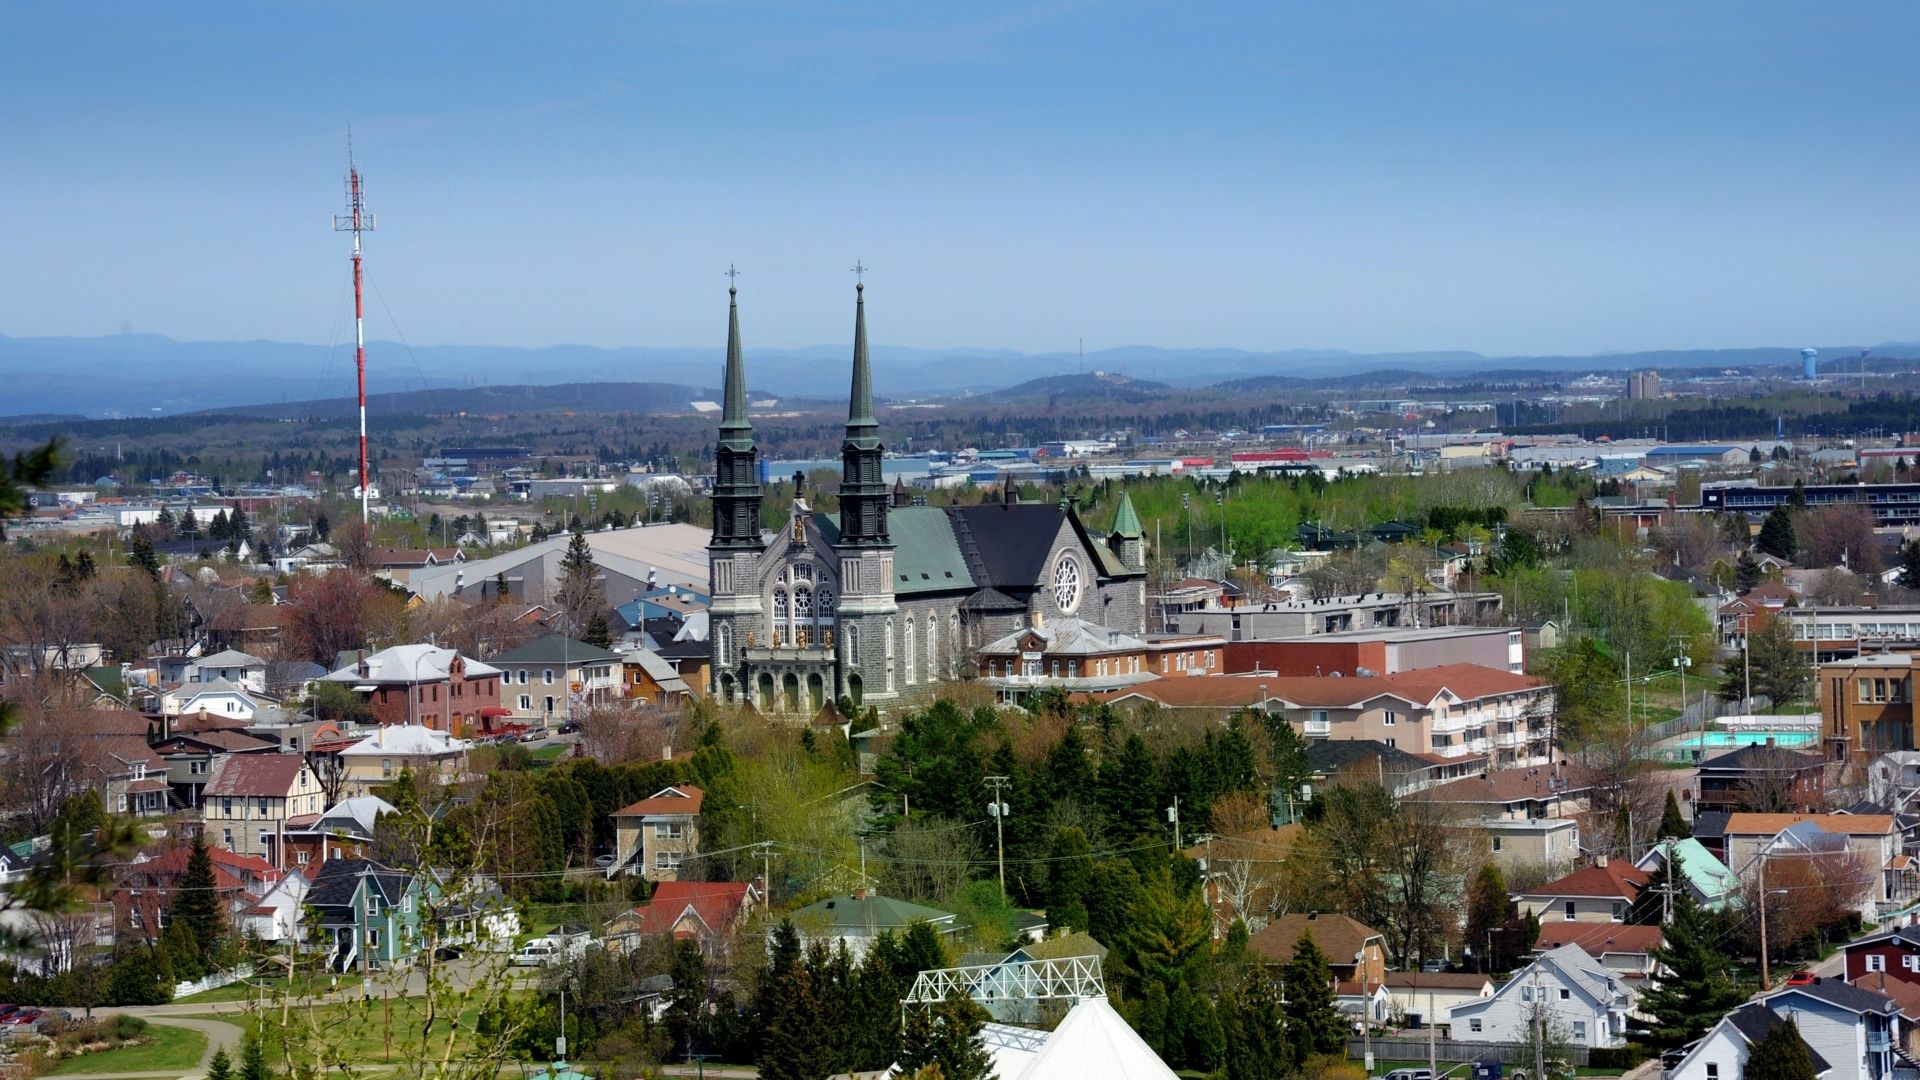 46-facts-about-chicoutimi-jonquiere